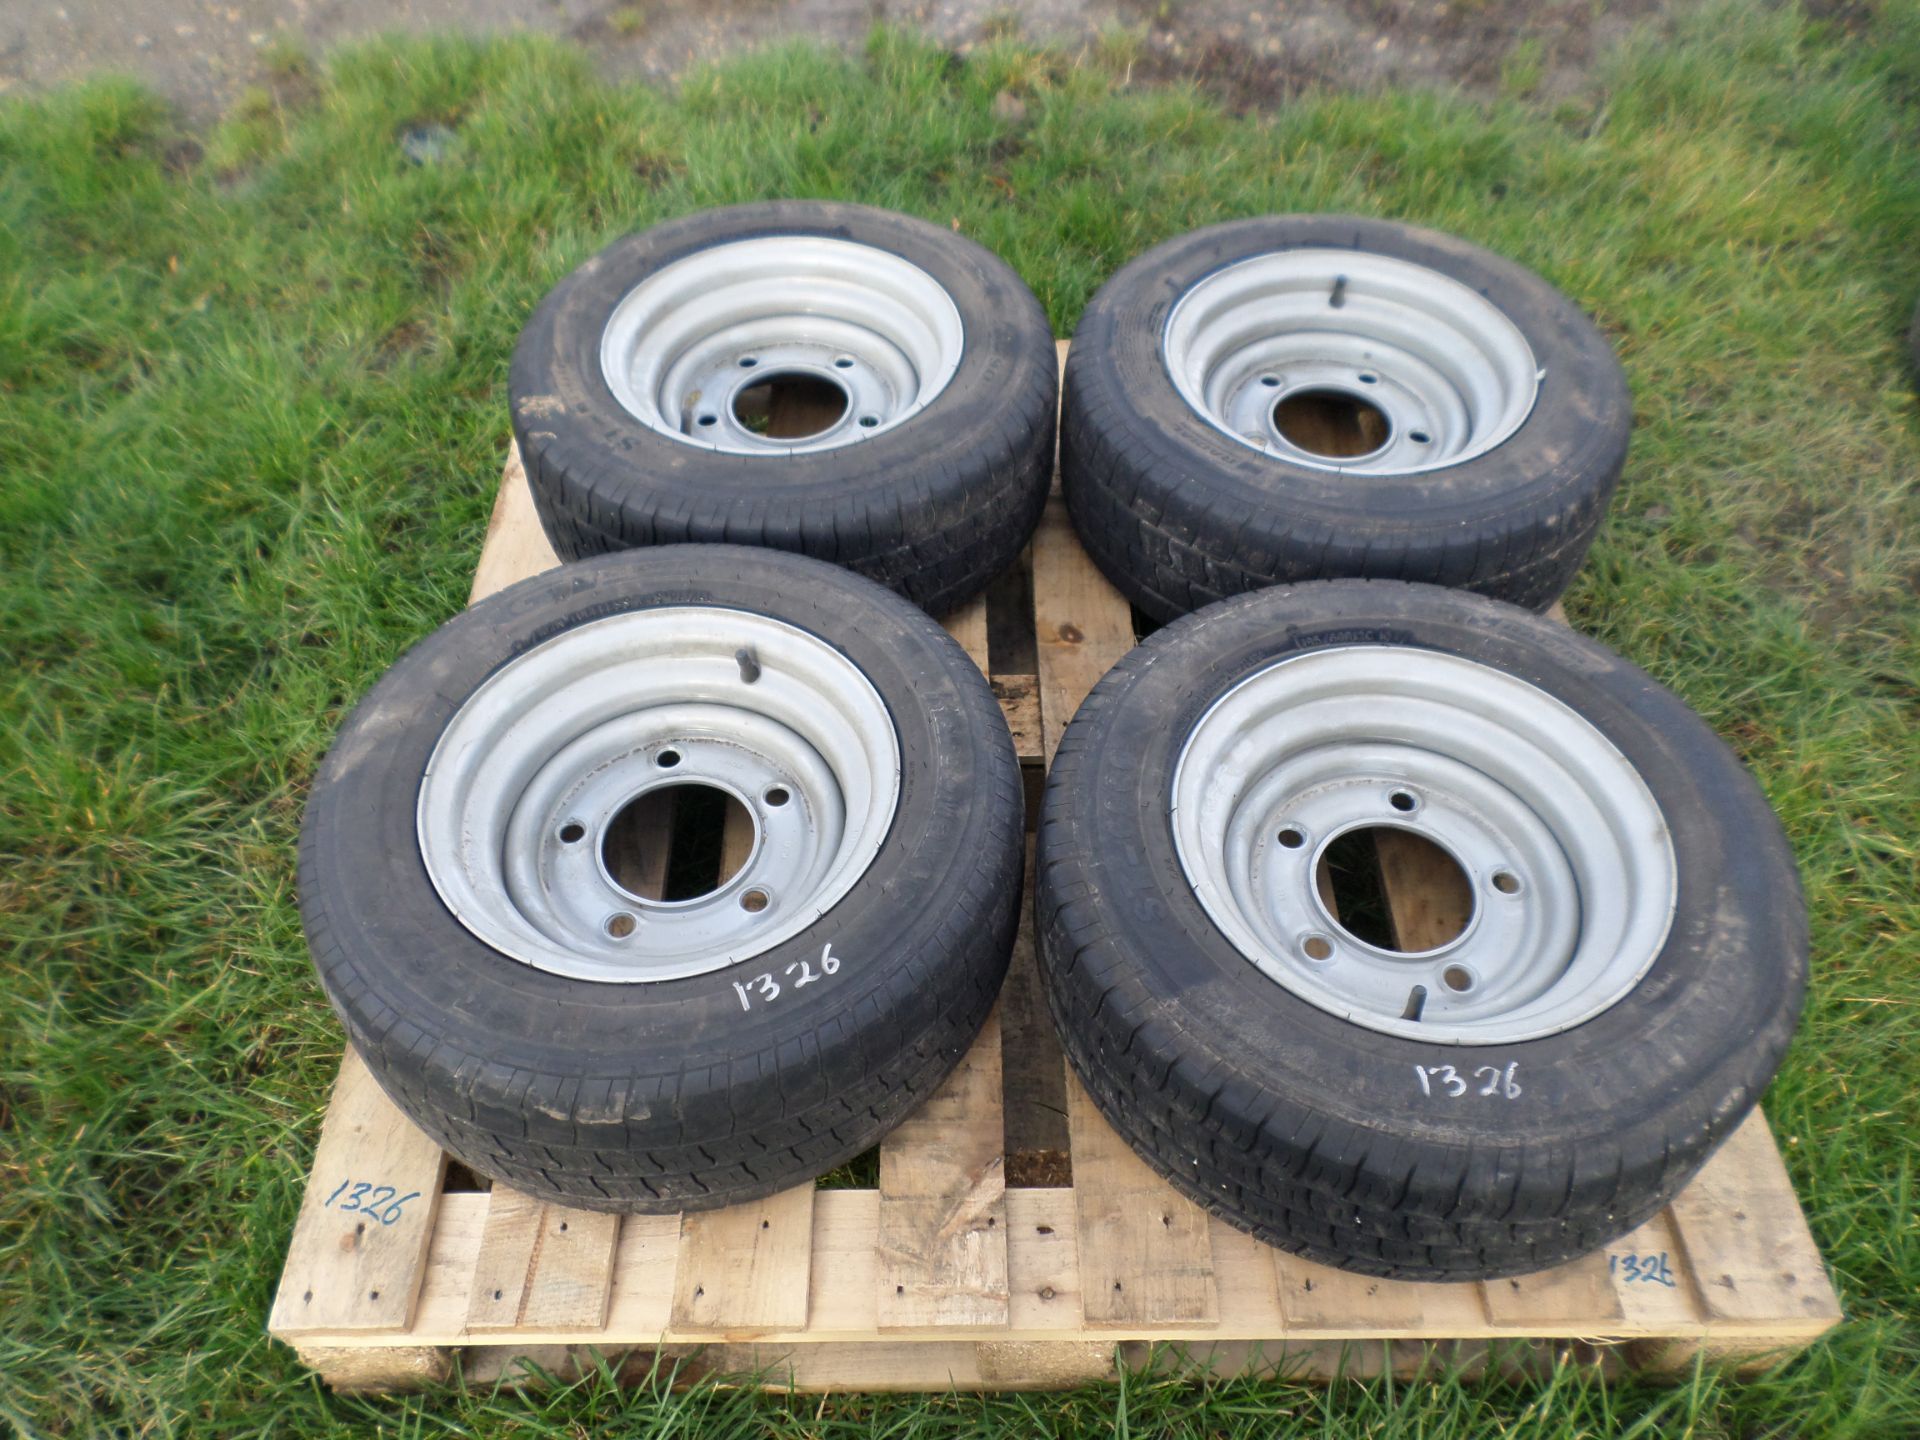 Set of 4 Ifor Williams 195/13 wheels/tyres, 2020